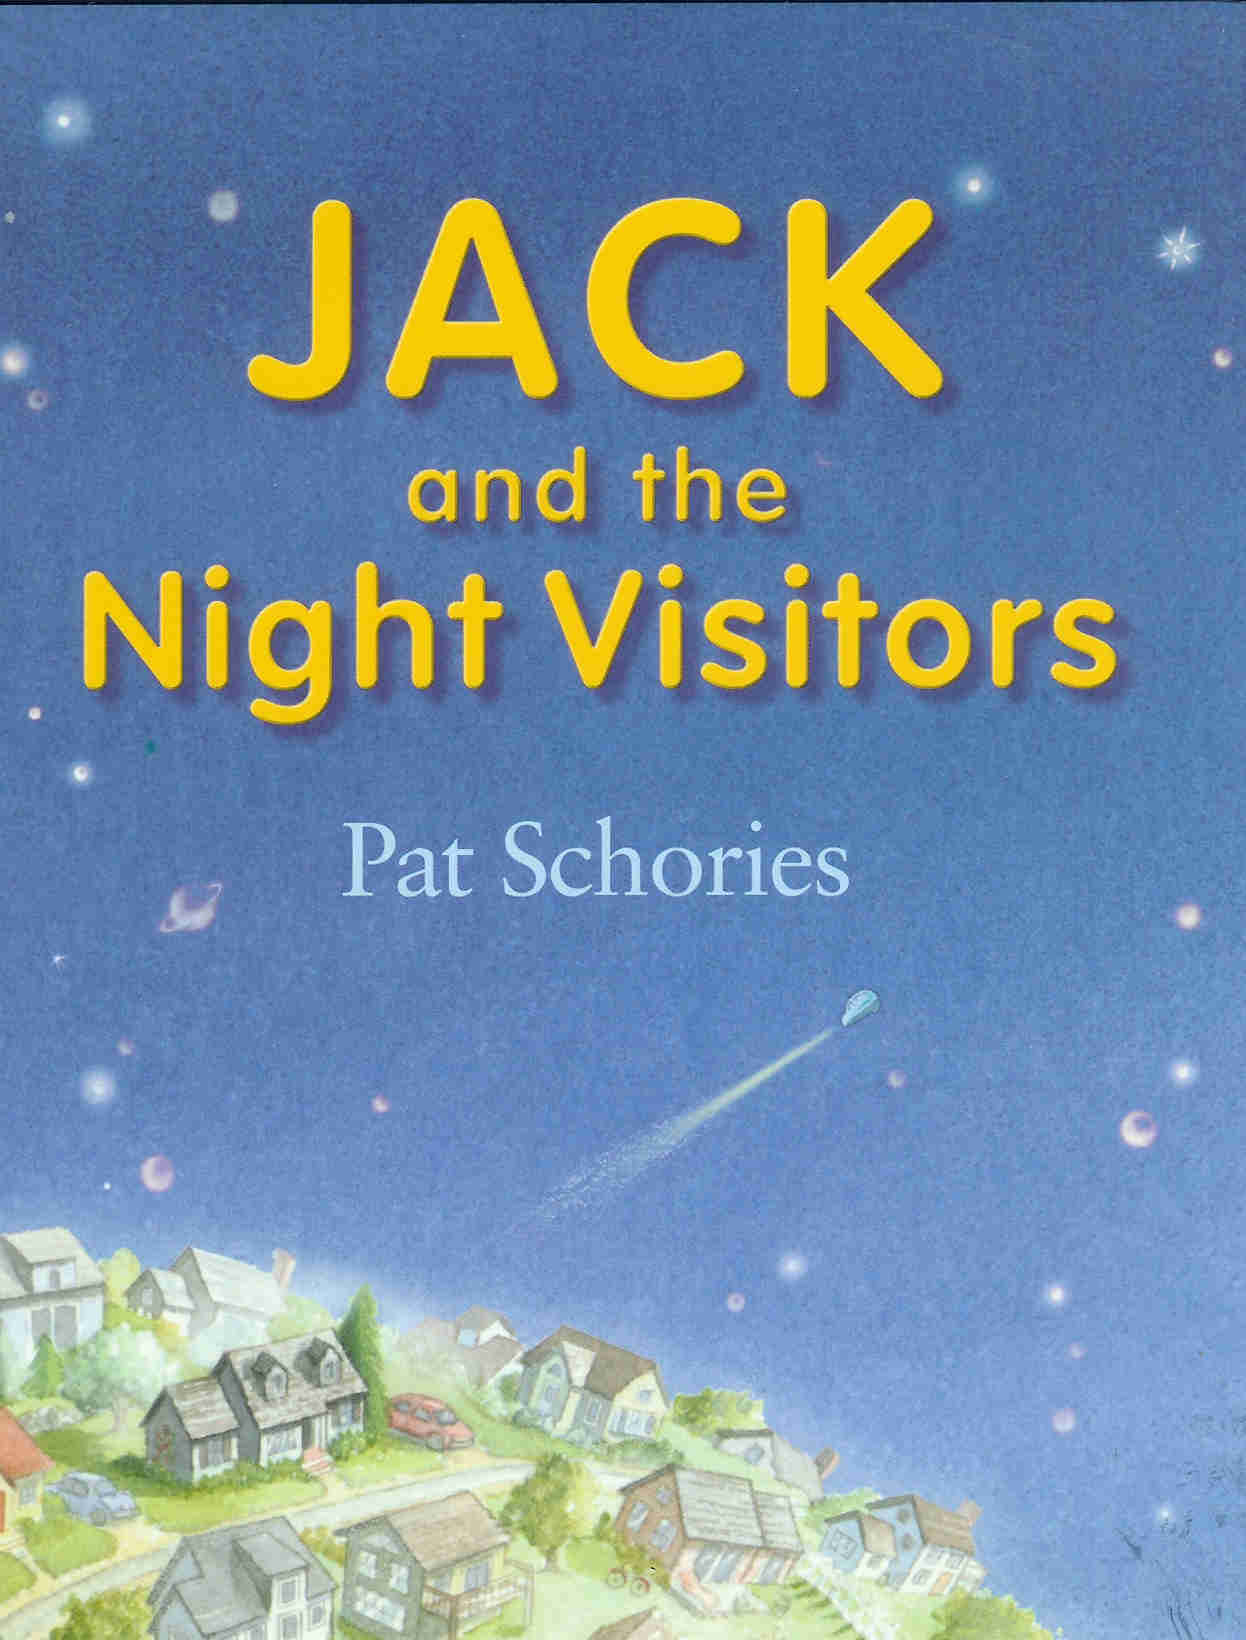 Jack and the night visitors